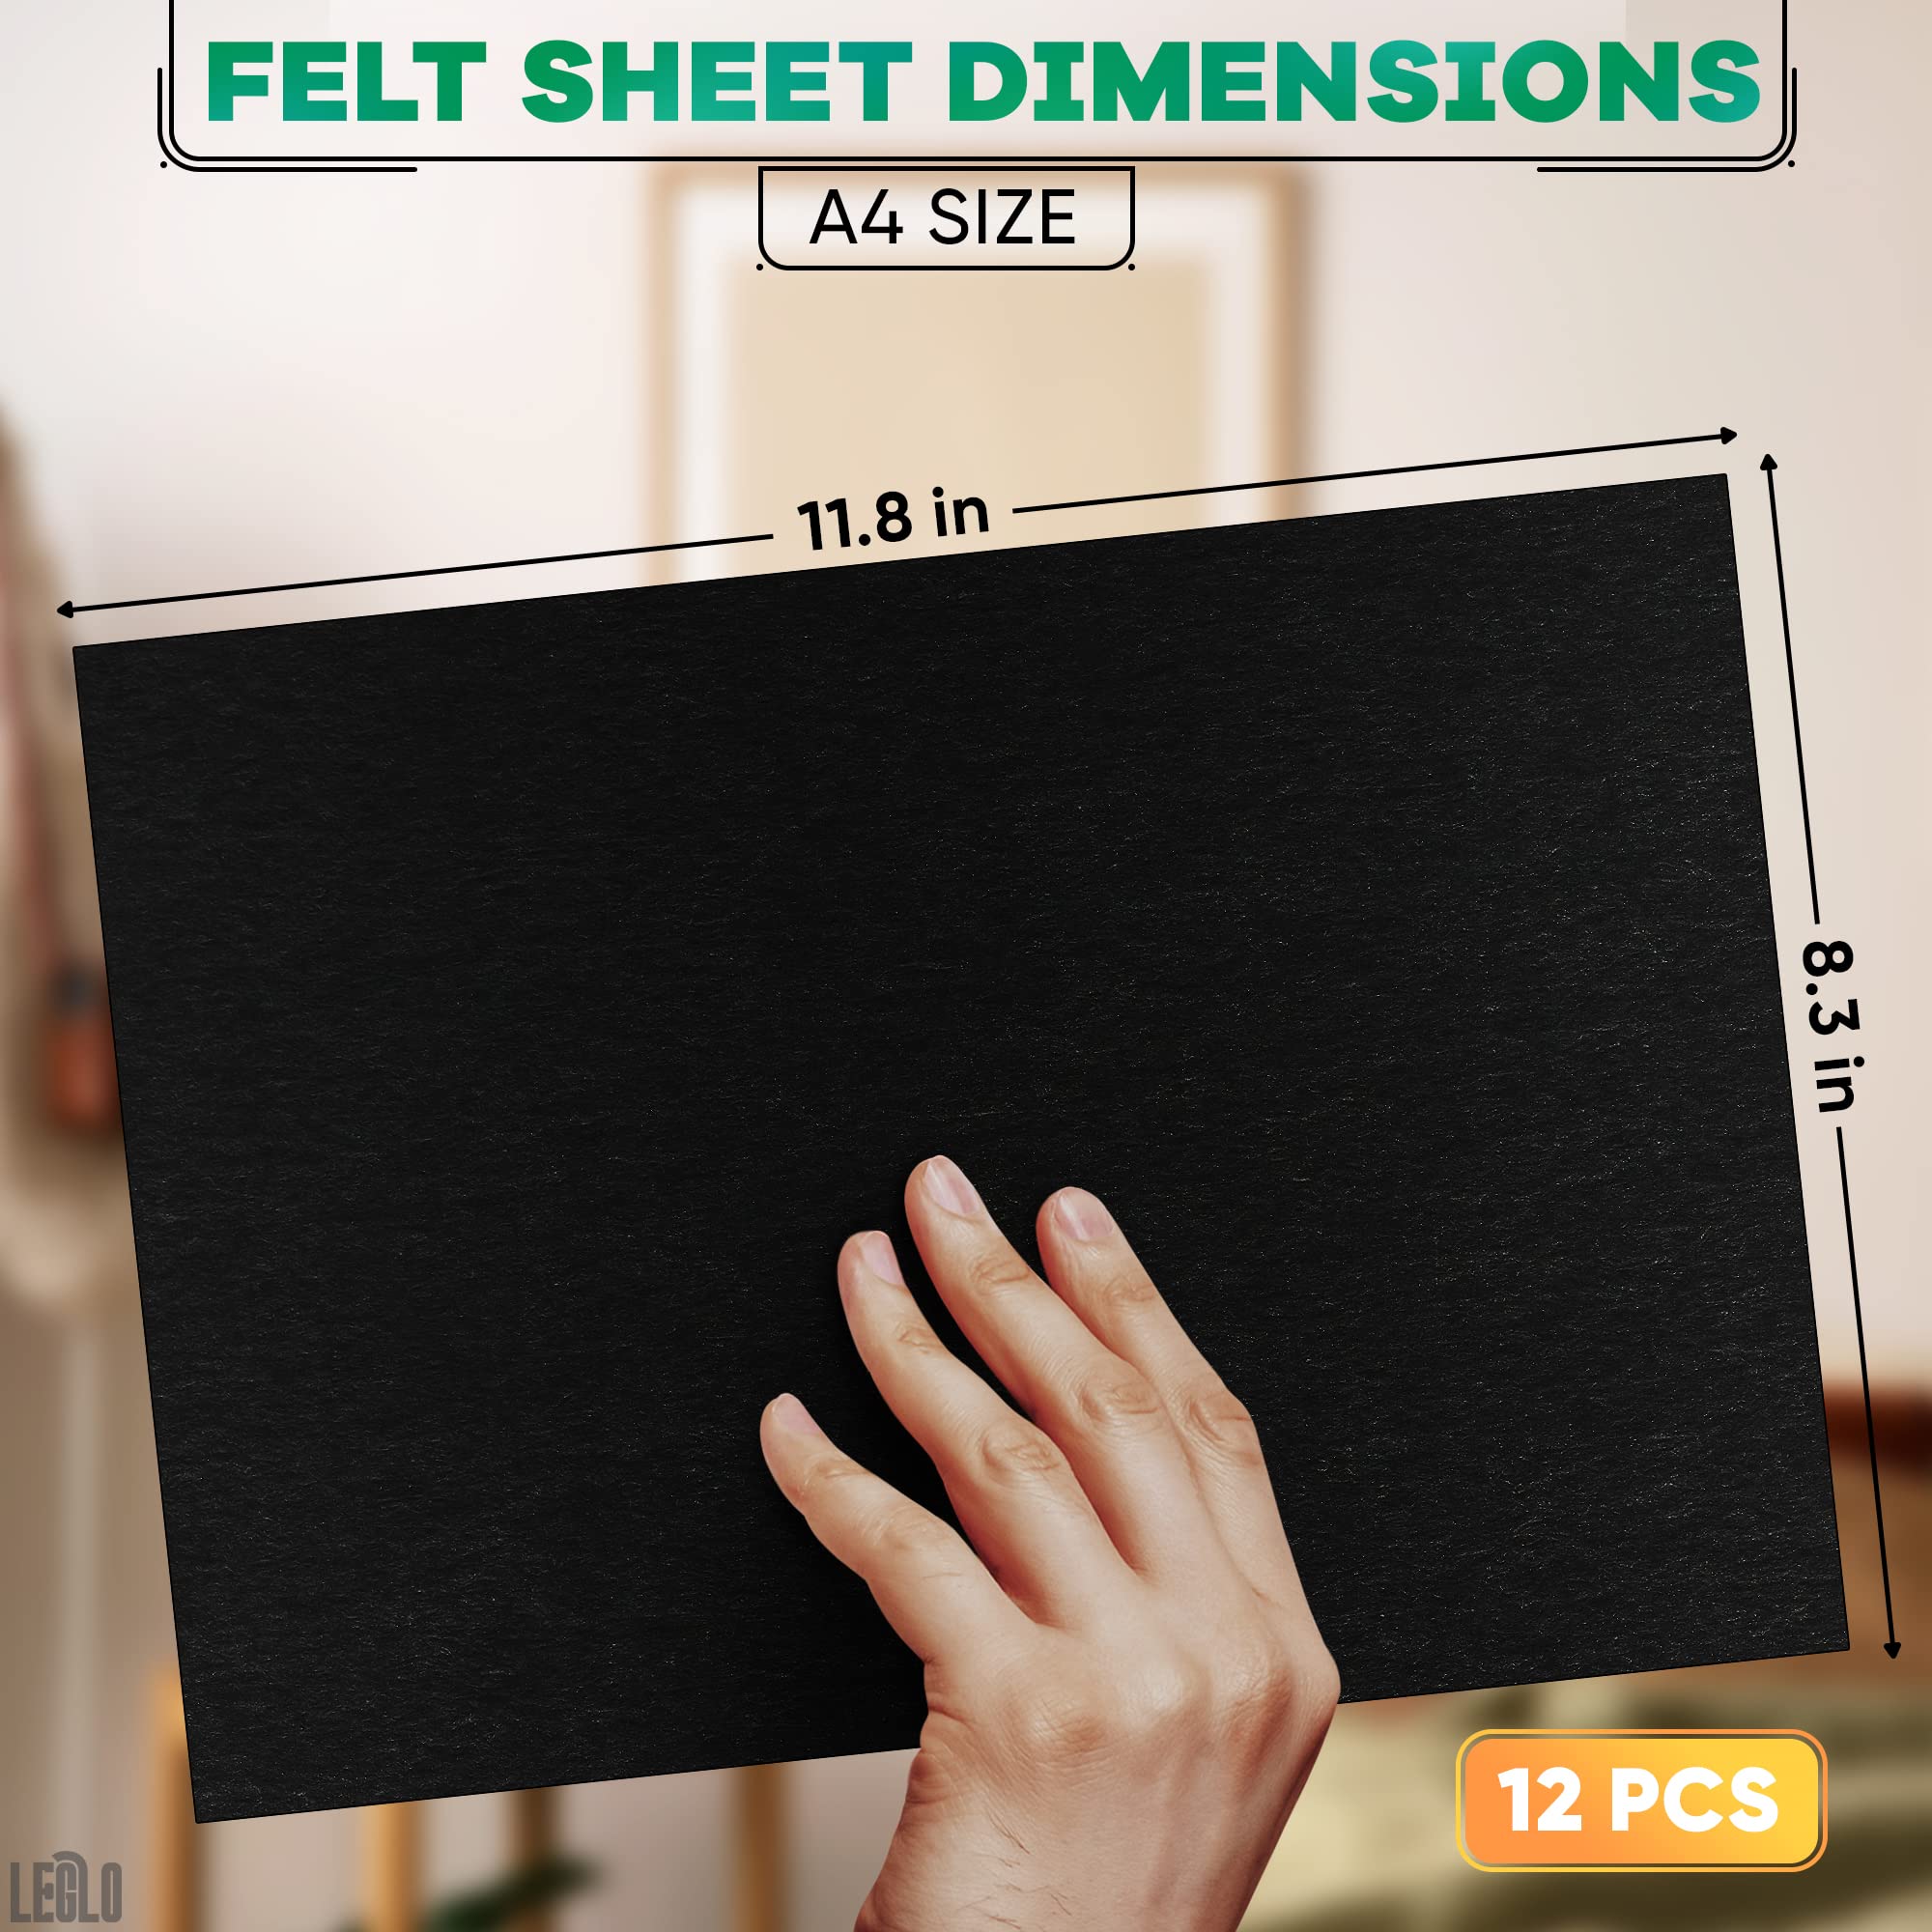 Black Felt Sheets with Adhesive Backing - 12Pcs Sticky Felt Sheets Adhesive Backed Craft Supply Box Liner Jewelry Furniture Felt Fabric Sheets - A4 Size Art Craft Felt Sheets Adhesive Felt Sheets